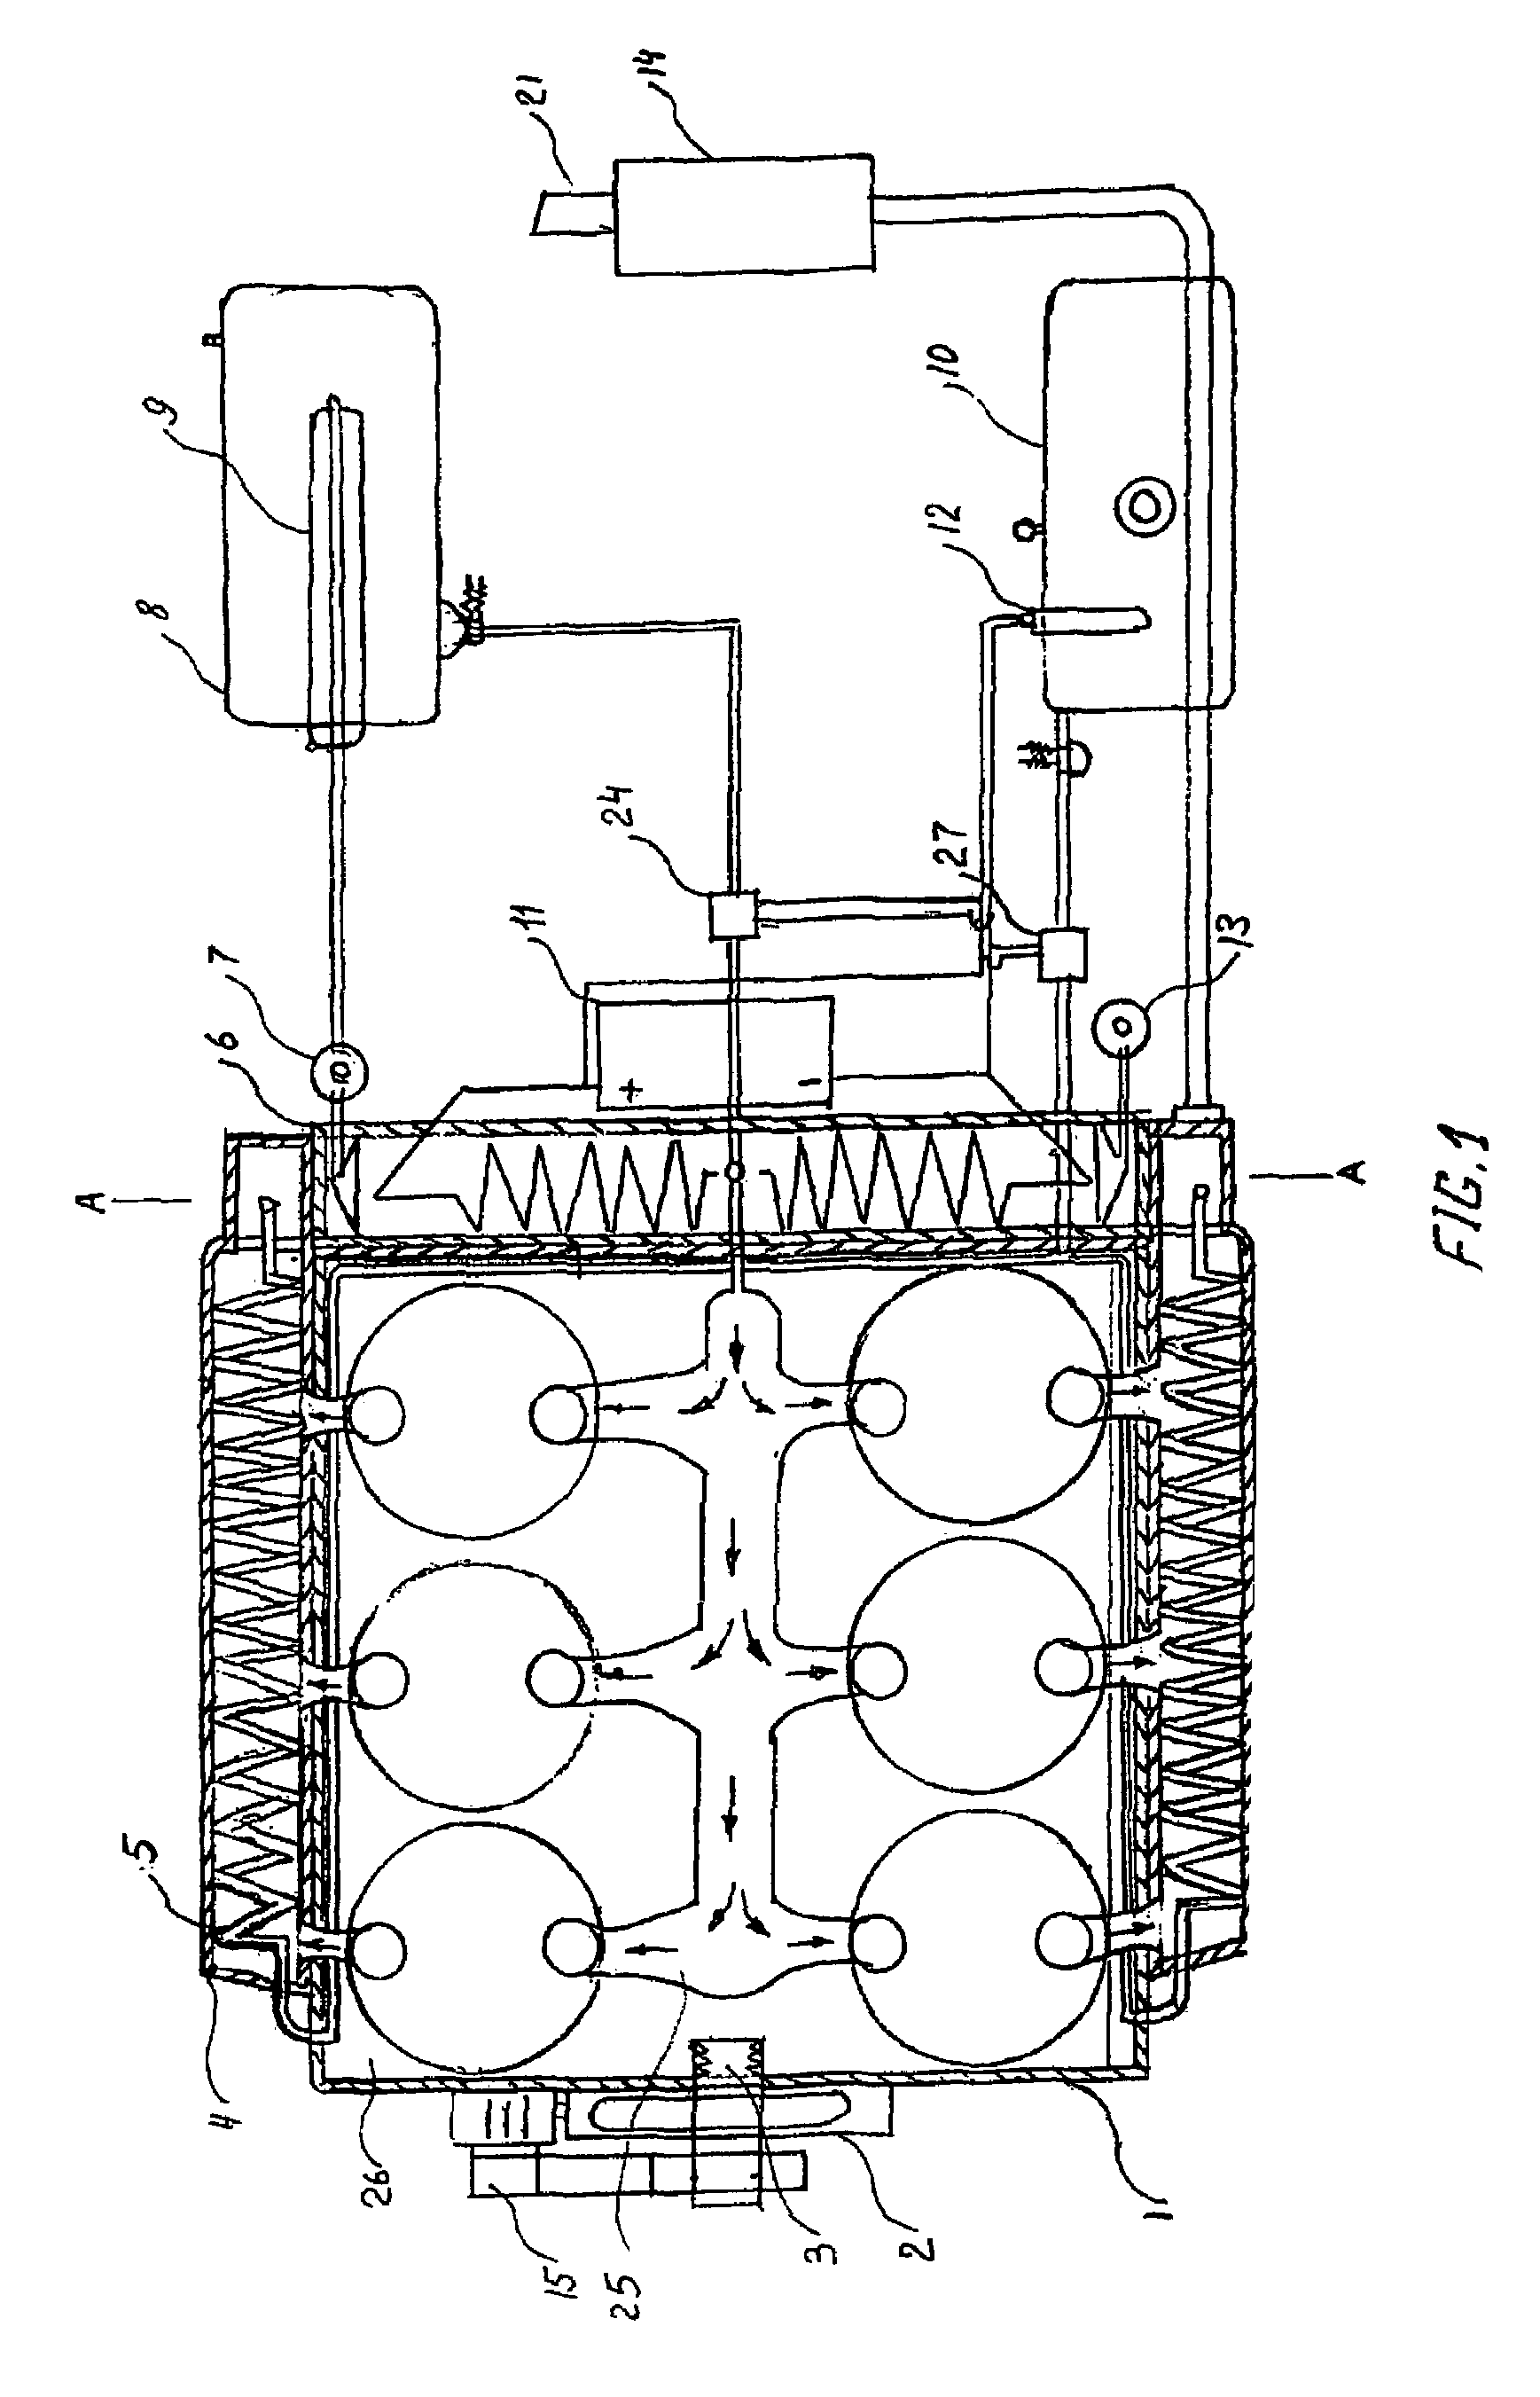 Hydrogen and oxygen production and accumulating apparatus including an internal combustion engine and method